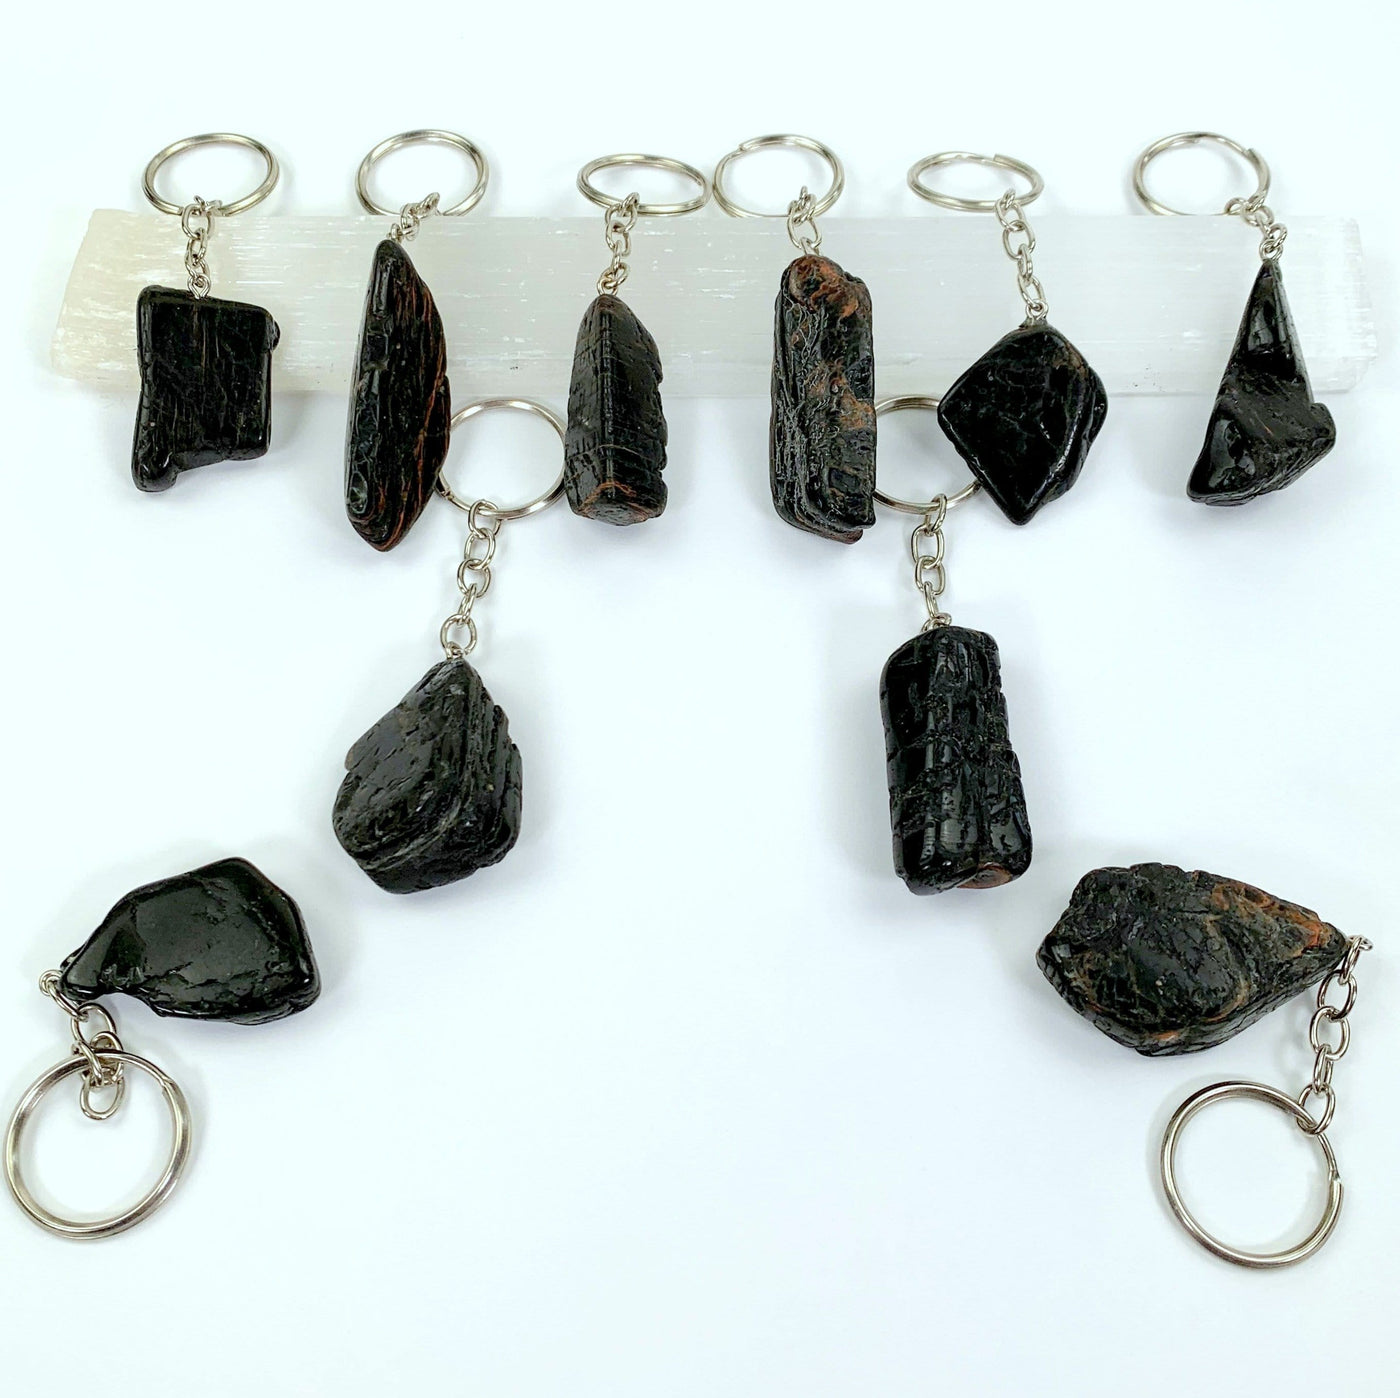 tourmaline with hematite keychains spread on a table